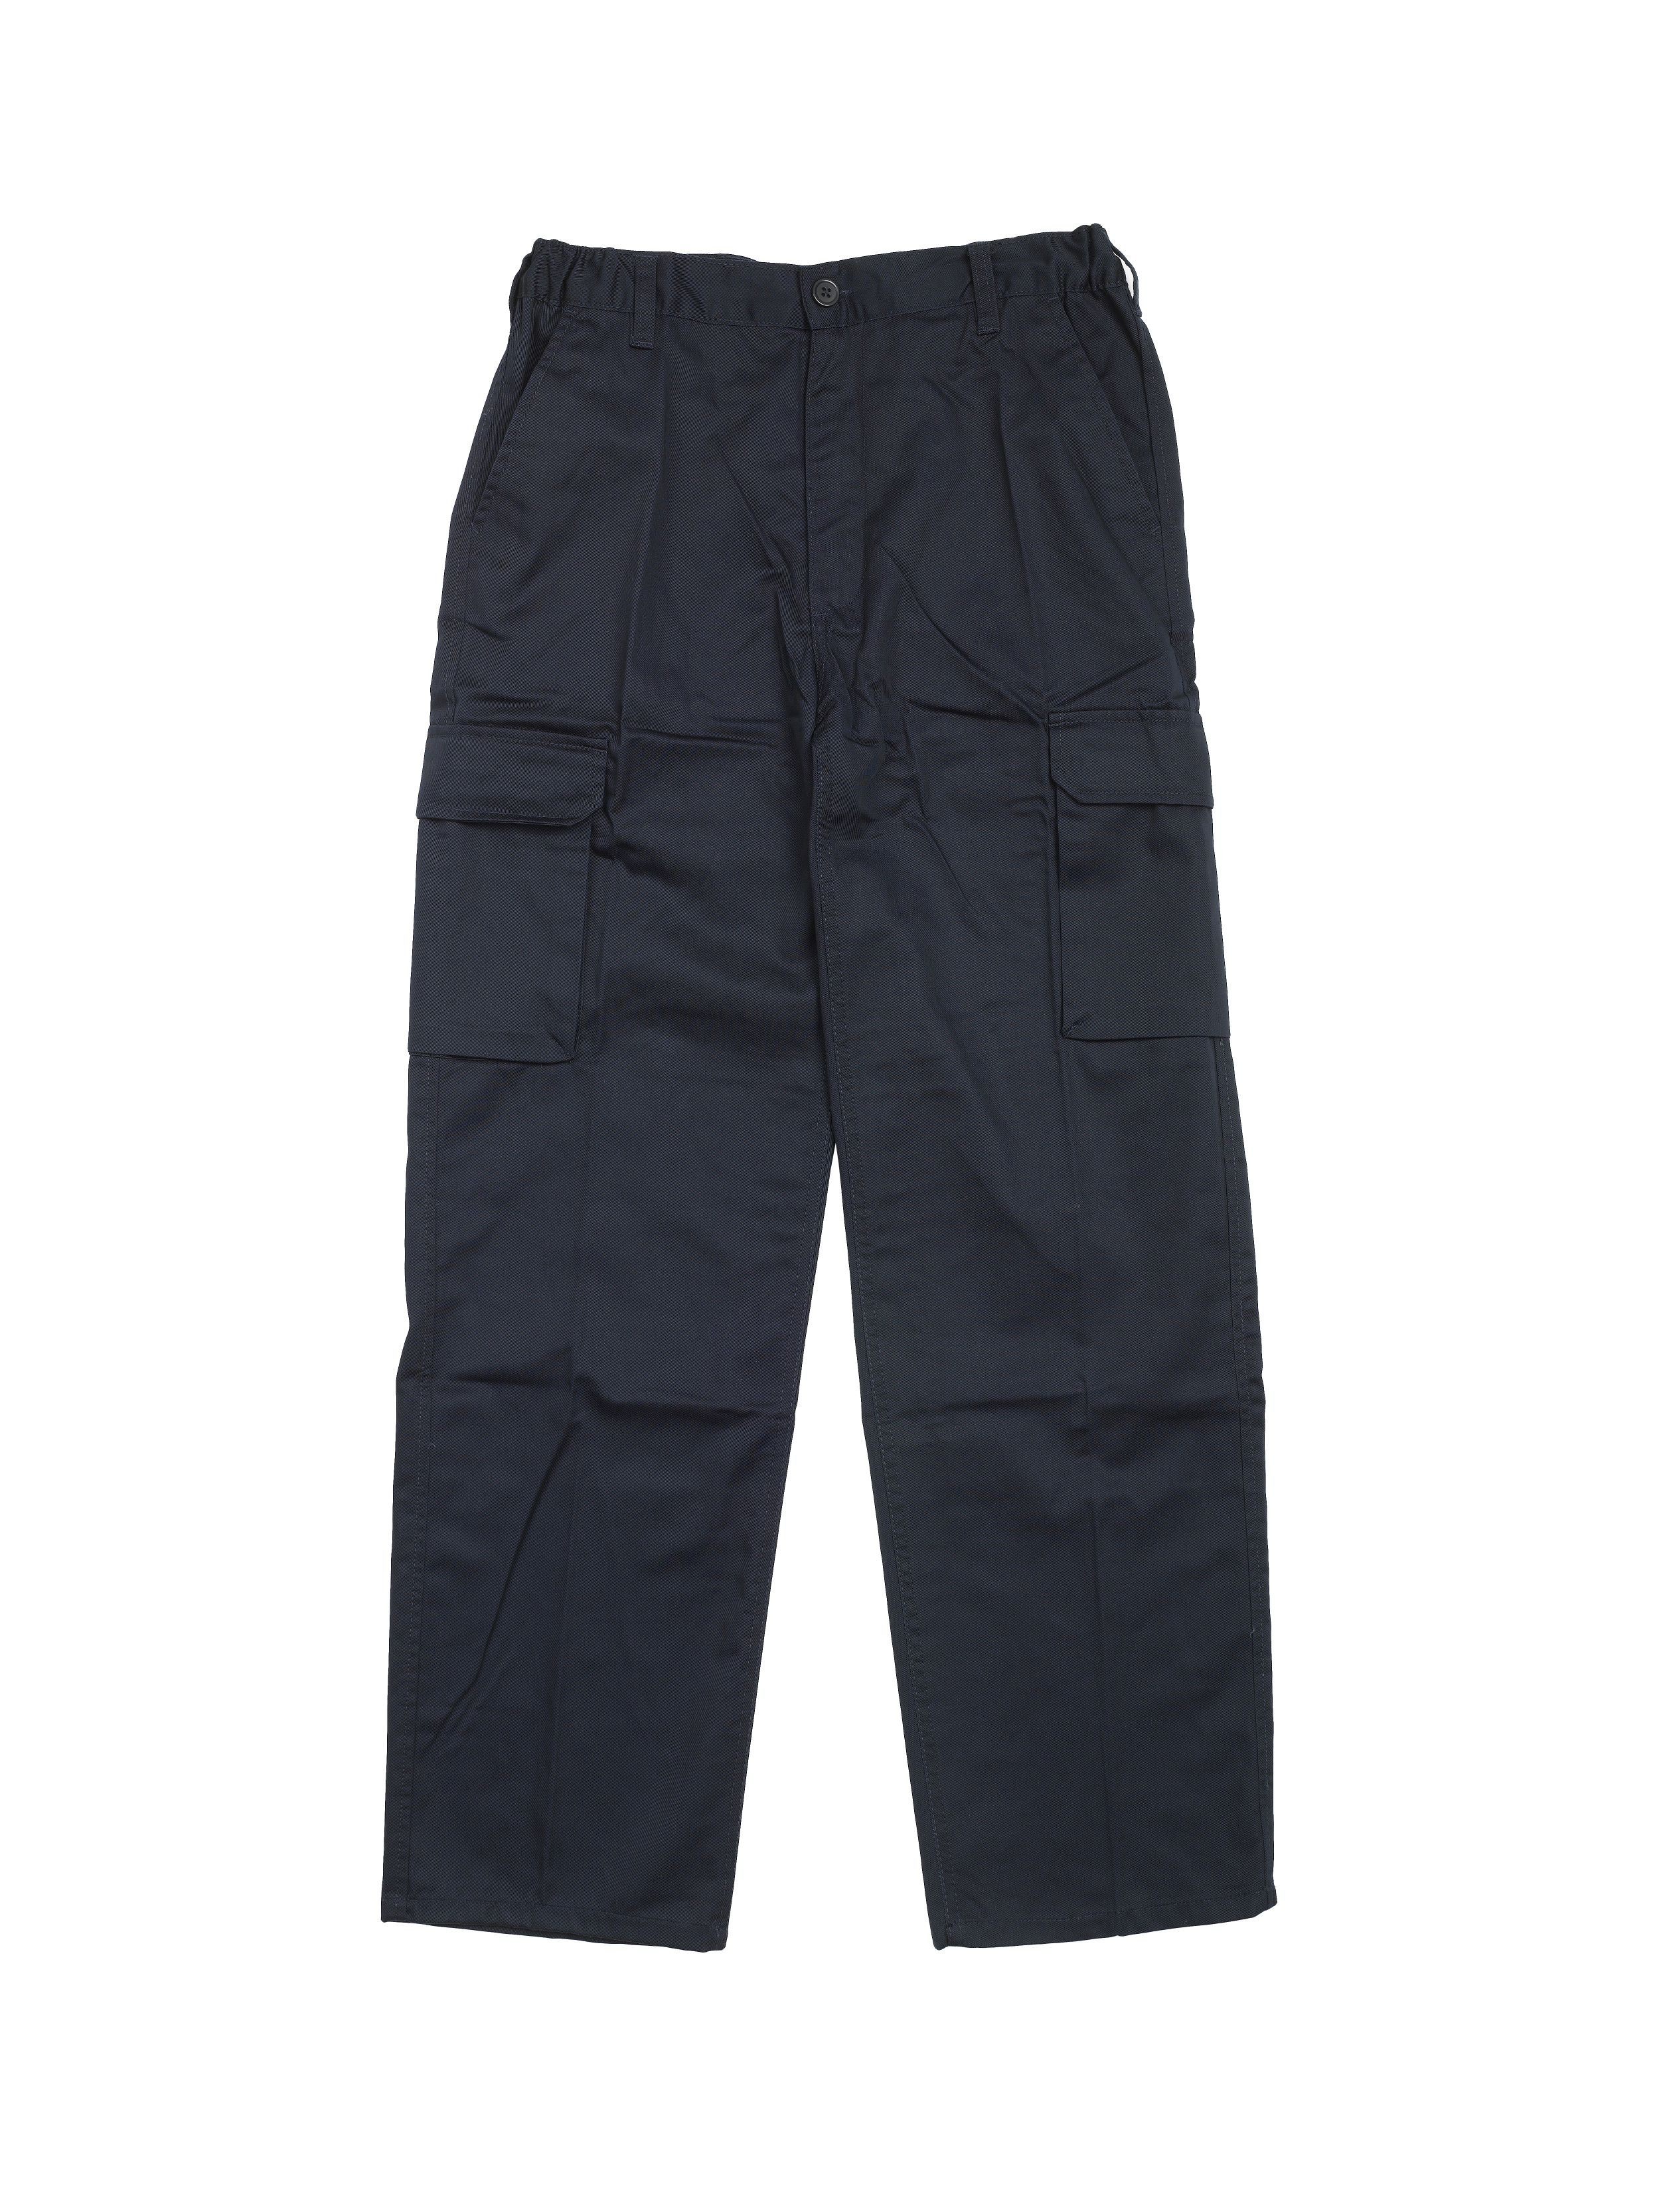 CARGO TROUSER | Warrior Protects